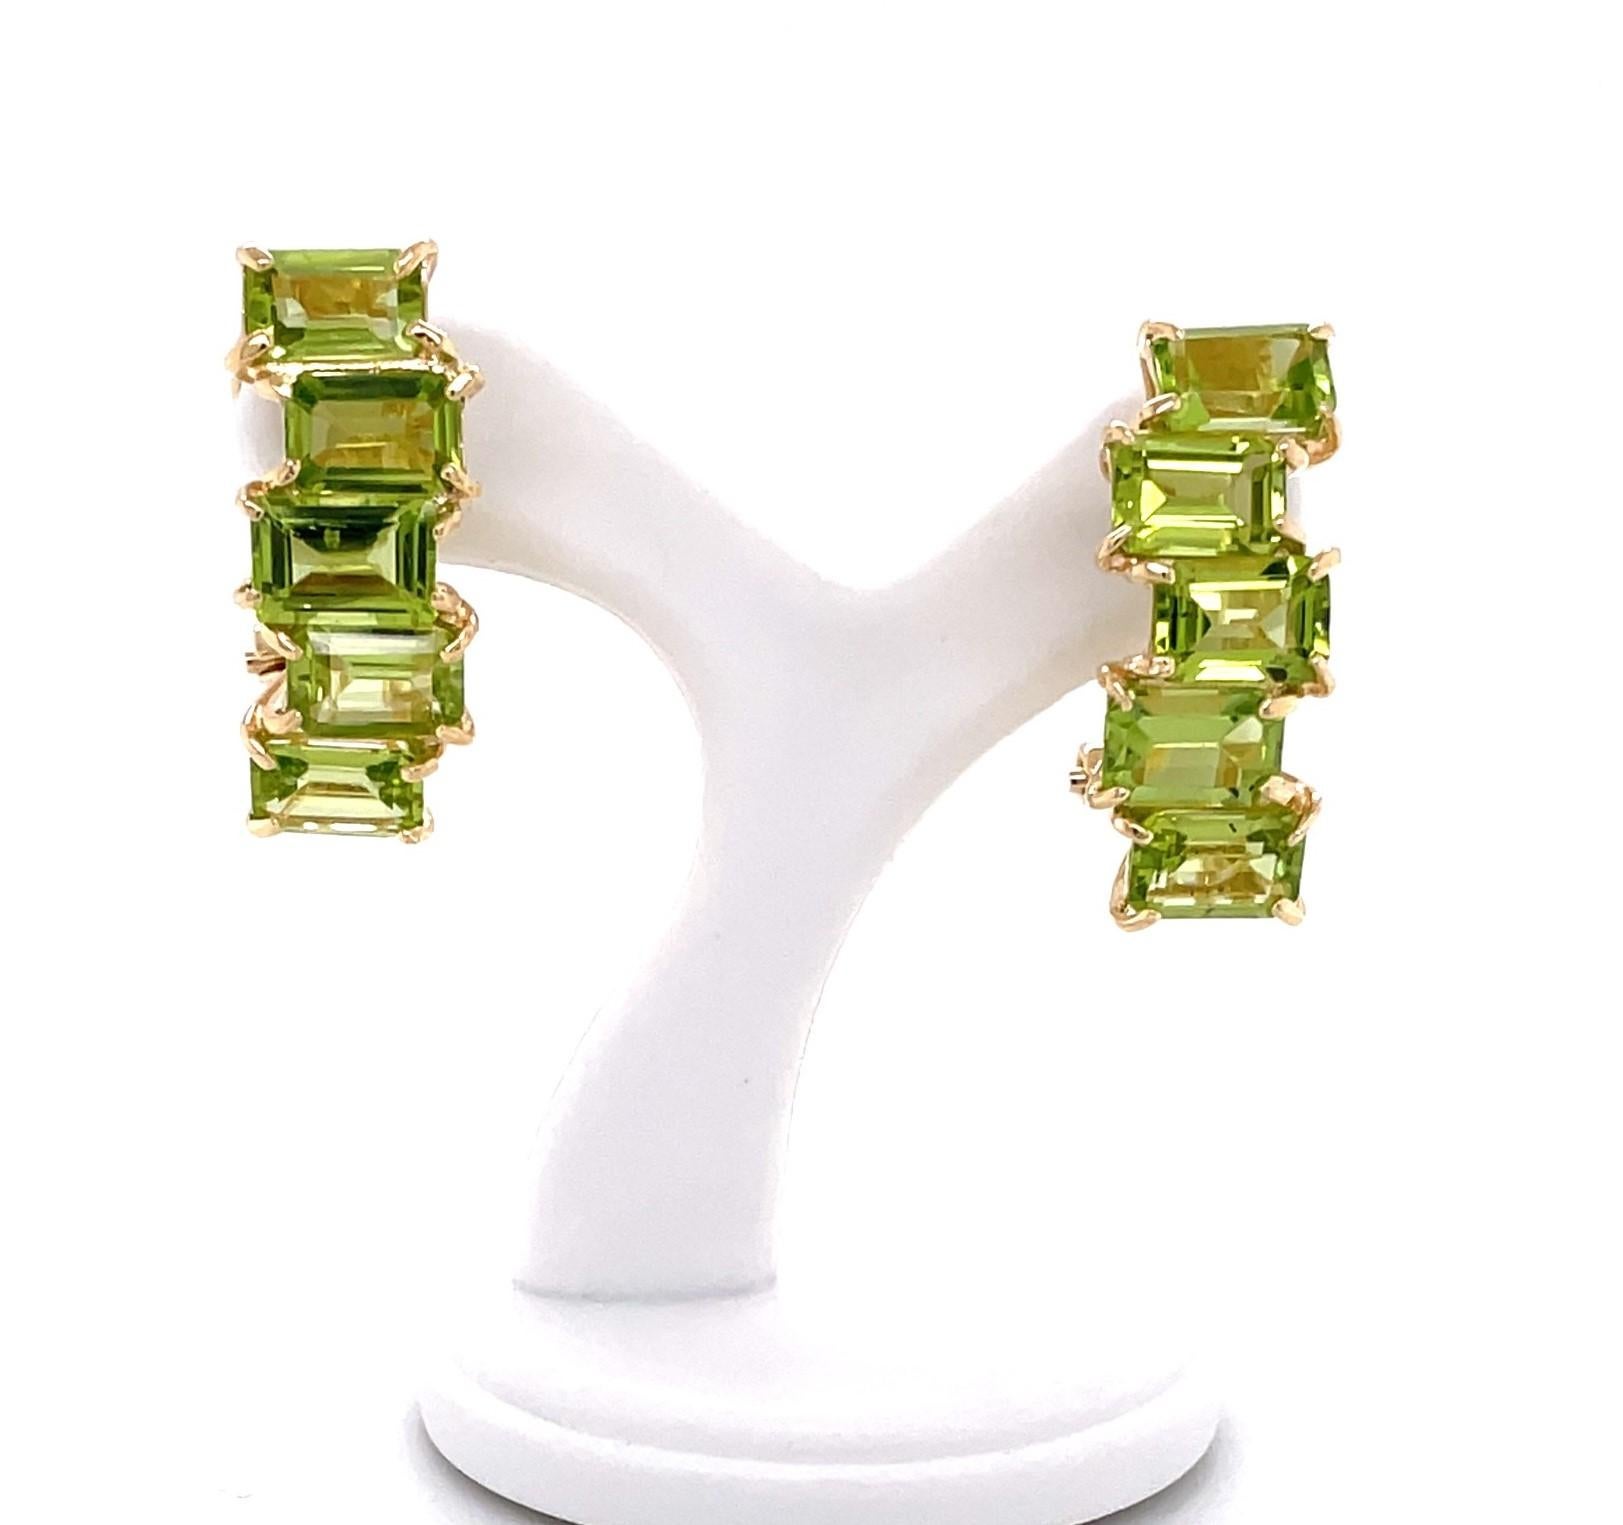 Ten vibrant lime green emerald-cut faceted .60 carat (4x6mm) peridot stones, 6.0 carats total weight, arranged in an abstract stack, create this lively pair of drop earrings.
In fourteen karat 14k yellow gold with post and omega clip, the earrings